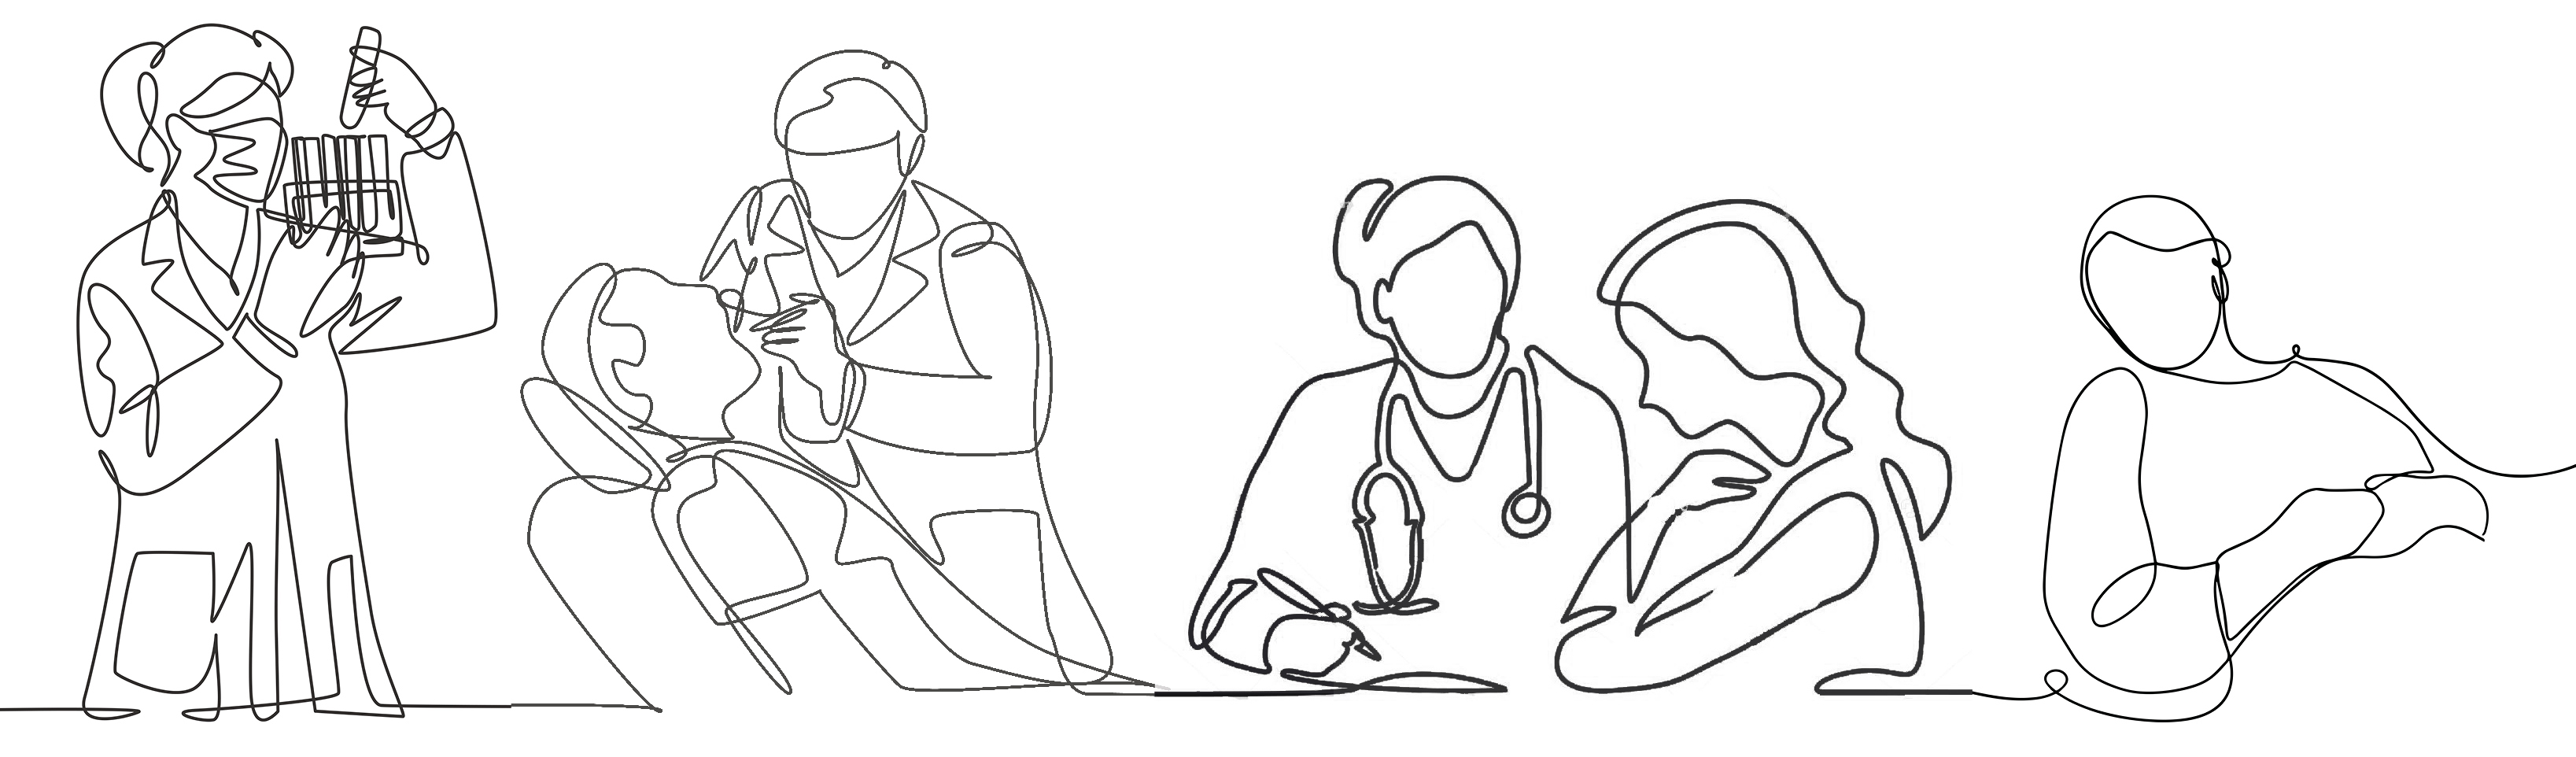 A line-drawing illustration of different healthcare professions including dentist and doctor